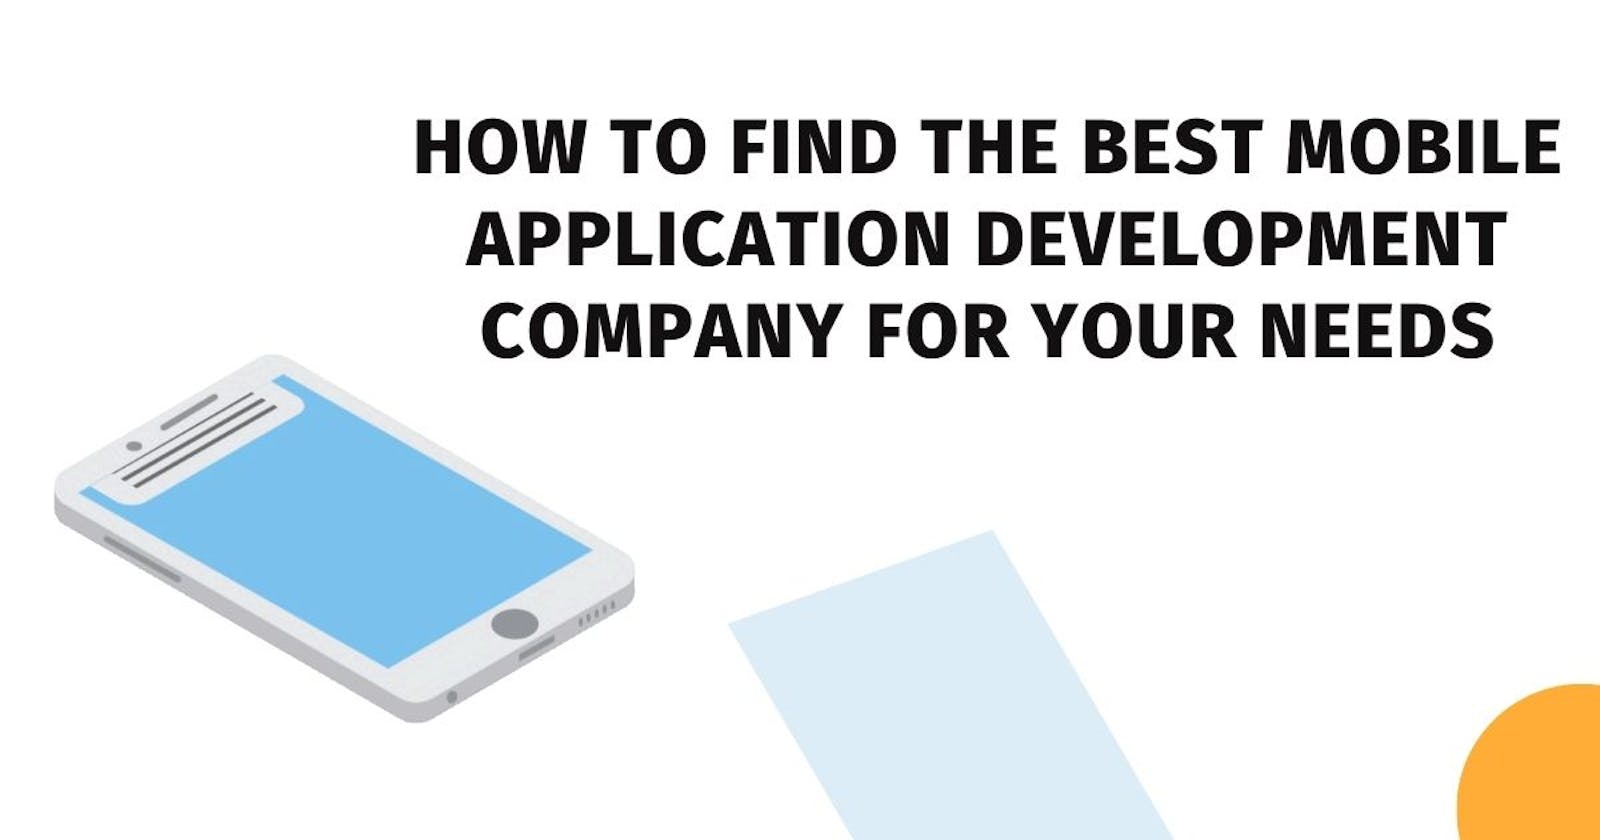 How to Find the Best Mobile Application Development Company for Your Needs